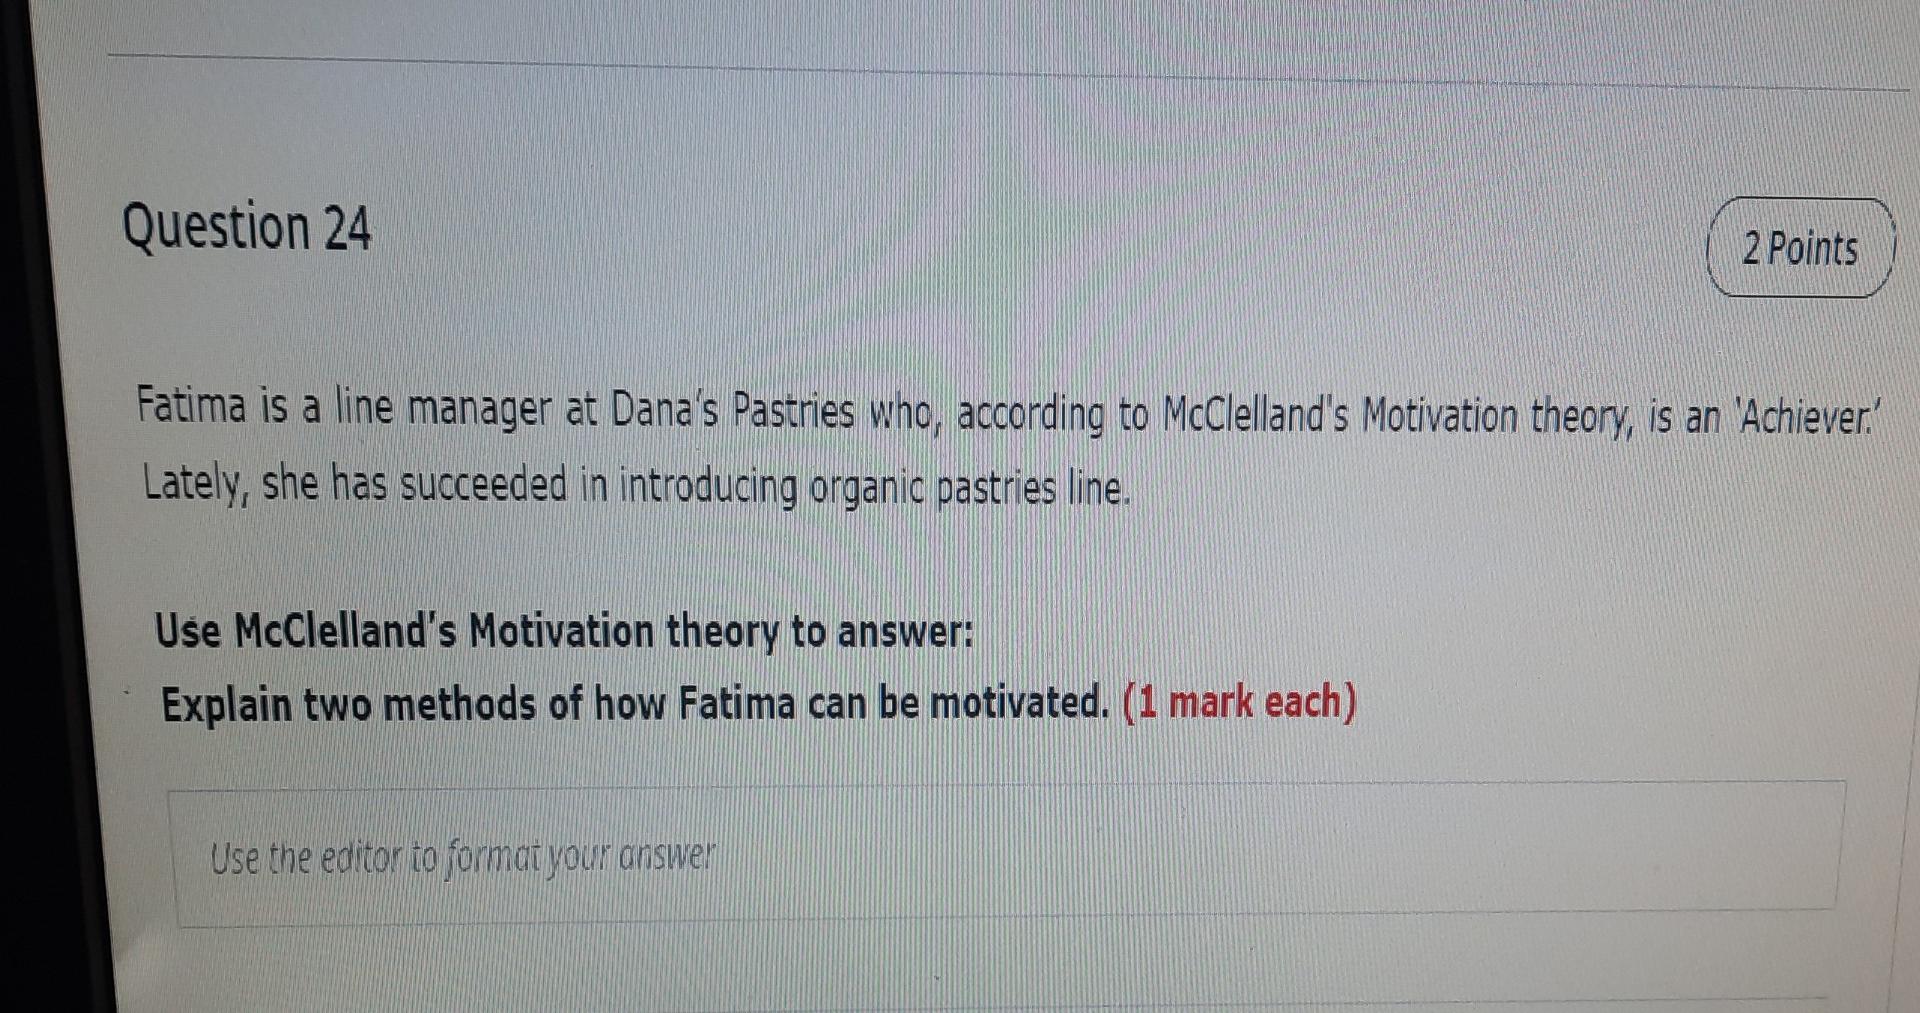 Question 24
2 Points
Fatima is a line manager at Danas Pastries who, according to McClellands Motivation theory, is an Ach